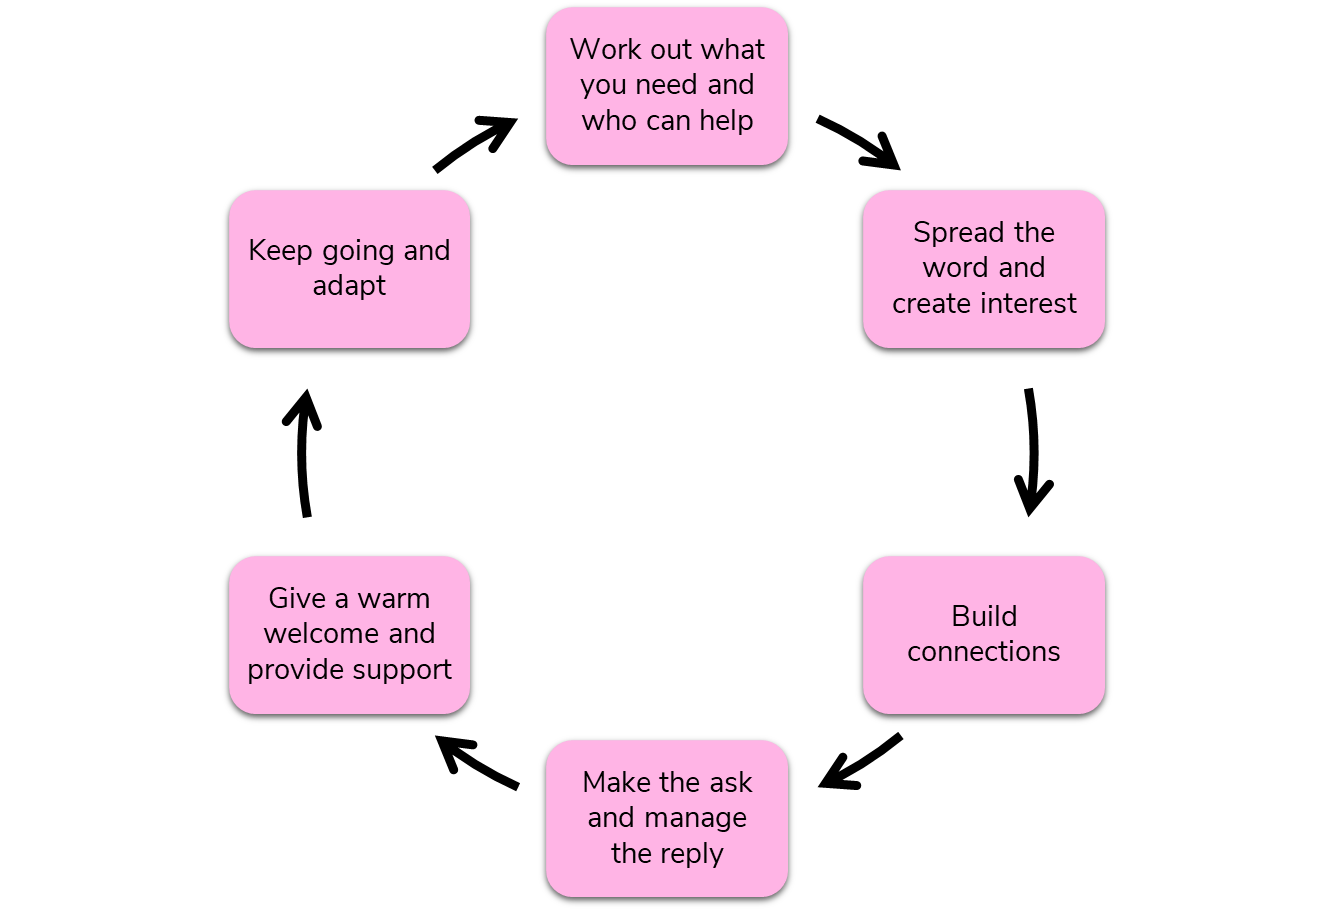 The Recruitment Cycle - Pink boxes in a circle with arrows between each box going clockwise: Work out what you need and who can help, spread the word and create interest, build connections, make the ask and manage the reply, give a warm welcome and provide support, keep going and adapt.